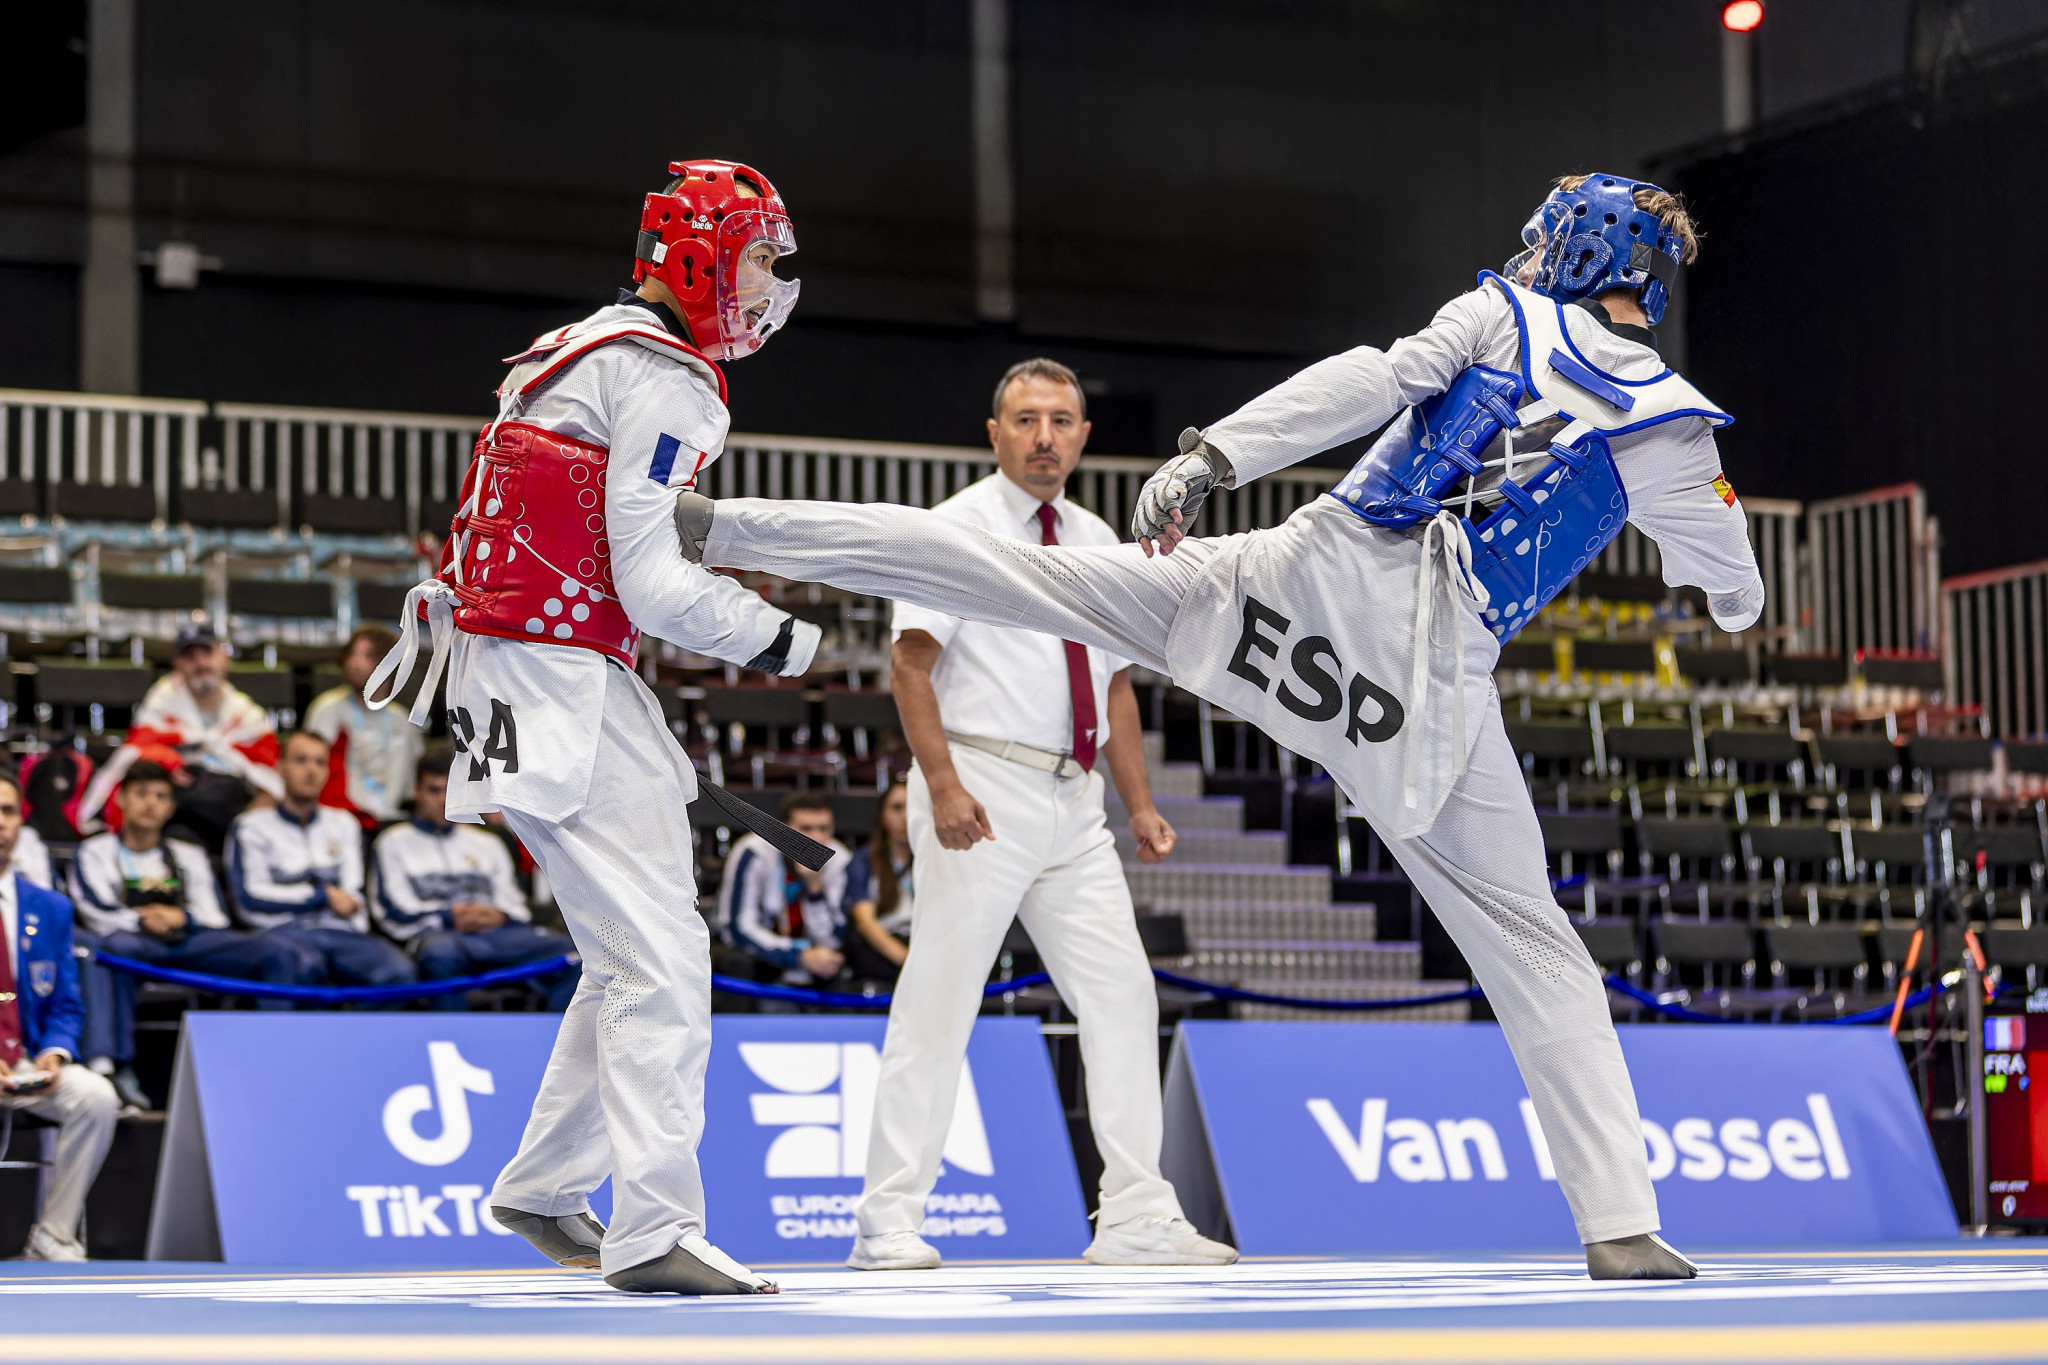 There were a number of exciting encounters as Para taekwondo fighters battled it out for medals ©EPC